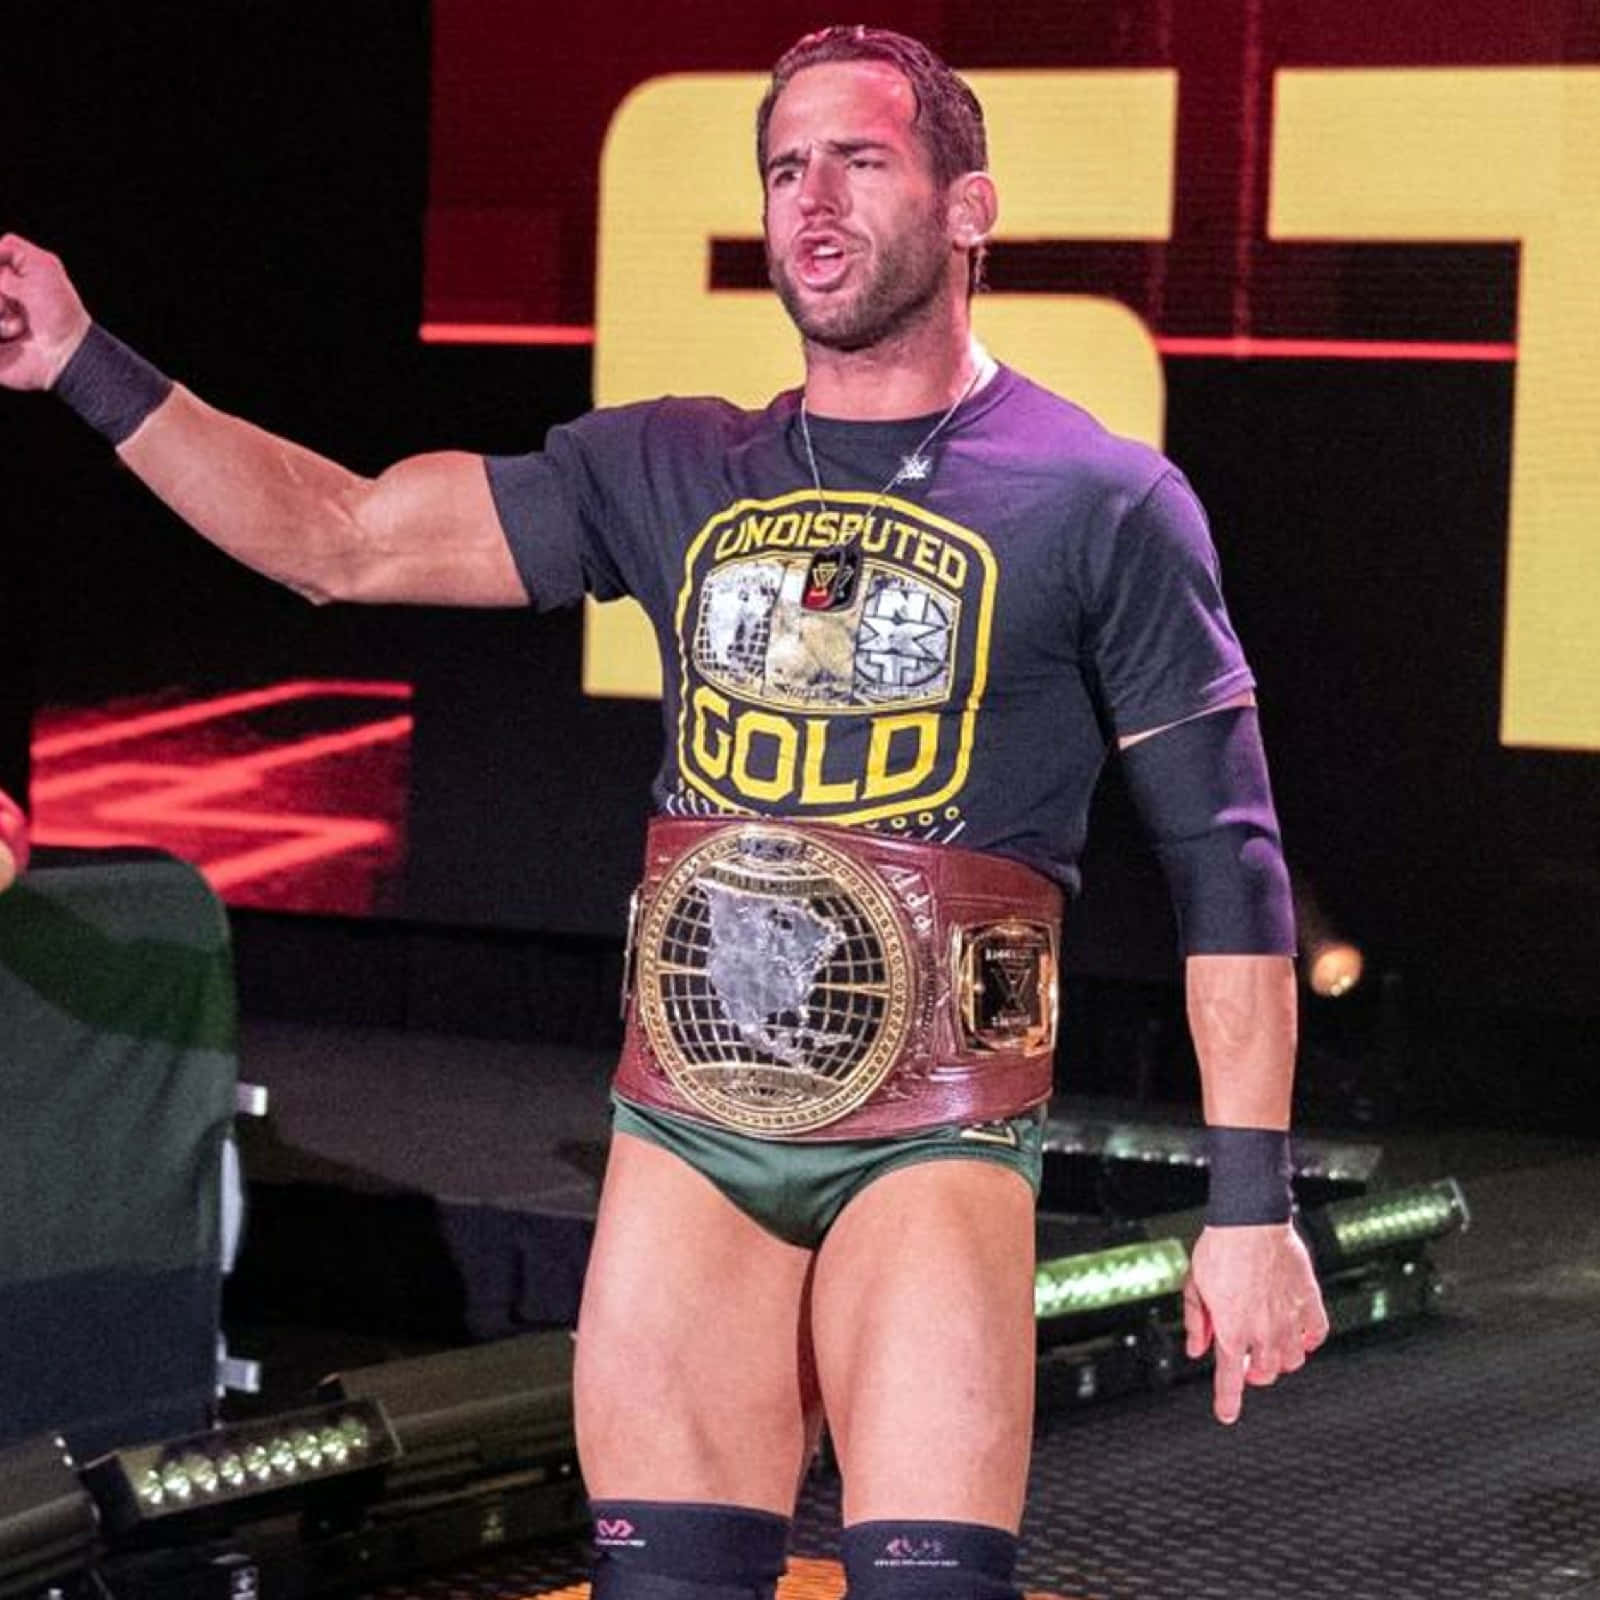 North American Championship Belt Roderick Strong Background